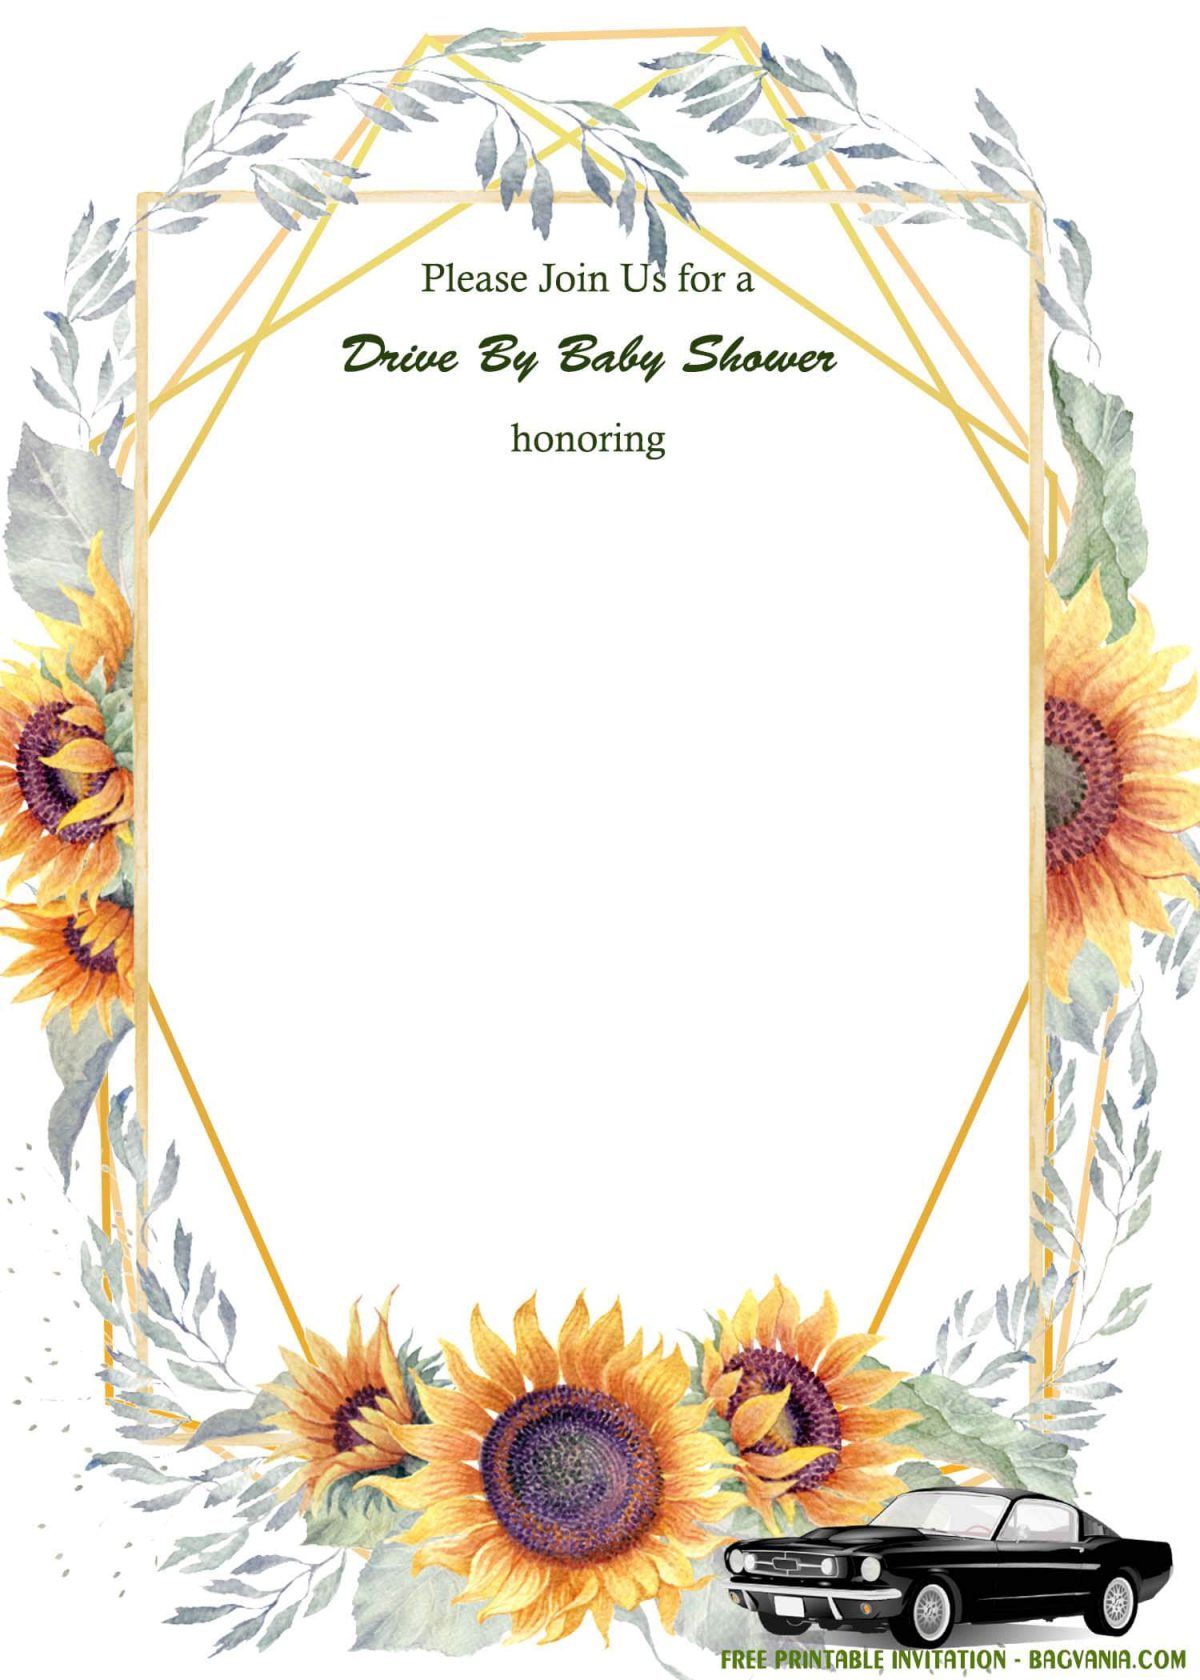 Free Printable Vintage Gold Invitation Templates With Classic Car Image